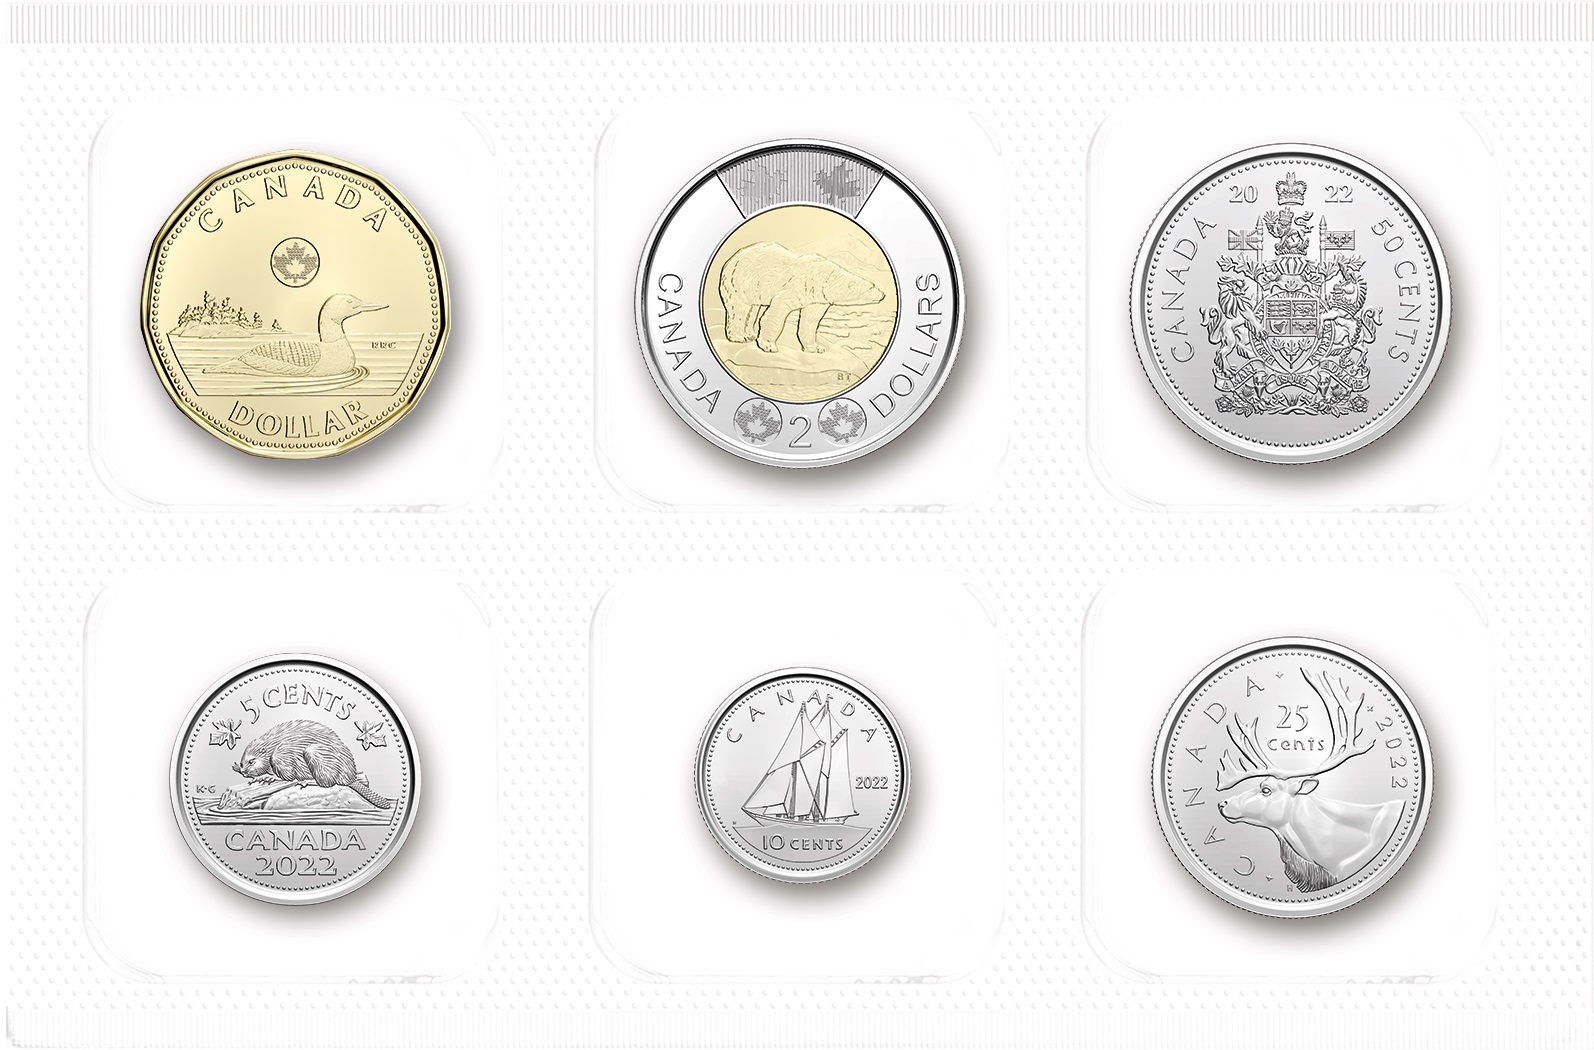 2017 Classic Canadian Uncirculated Set of Coins 